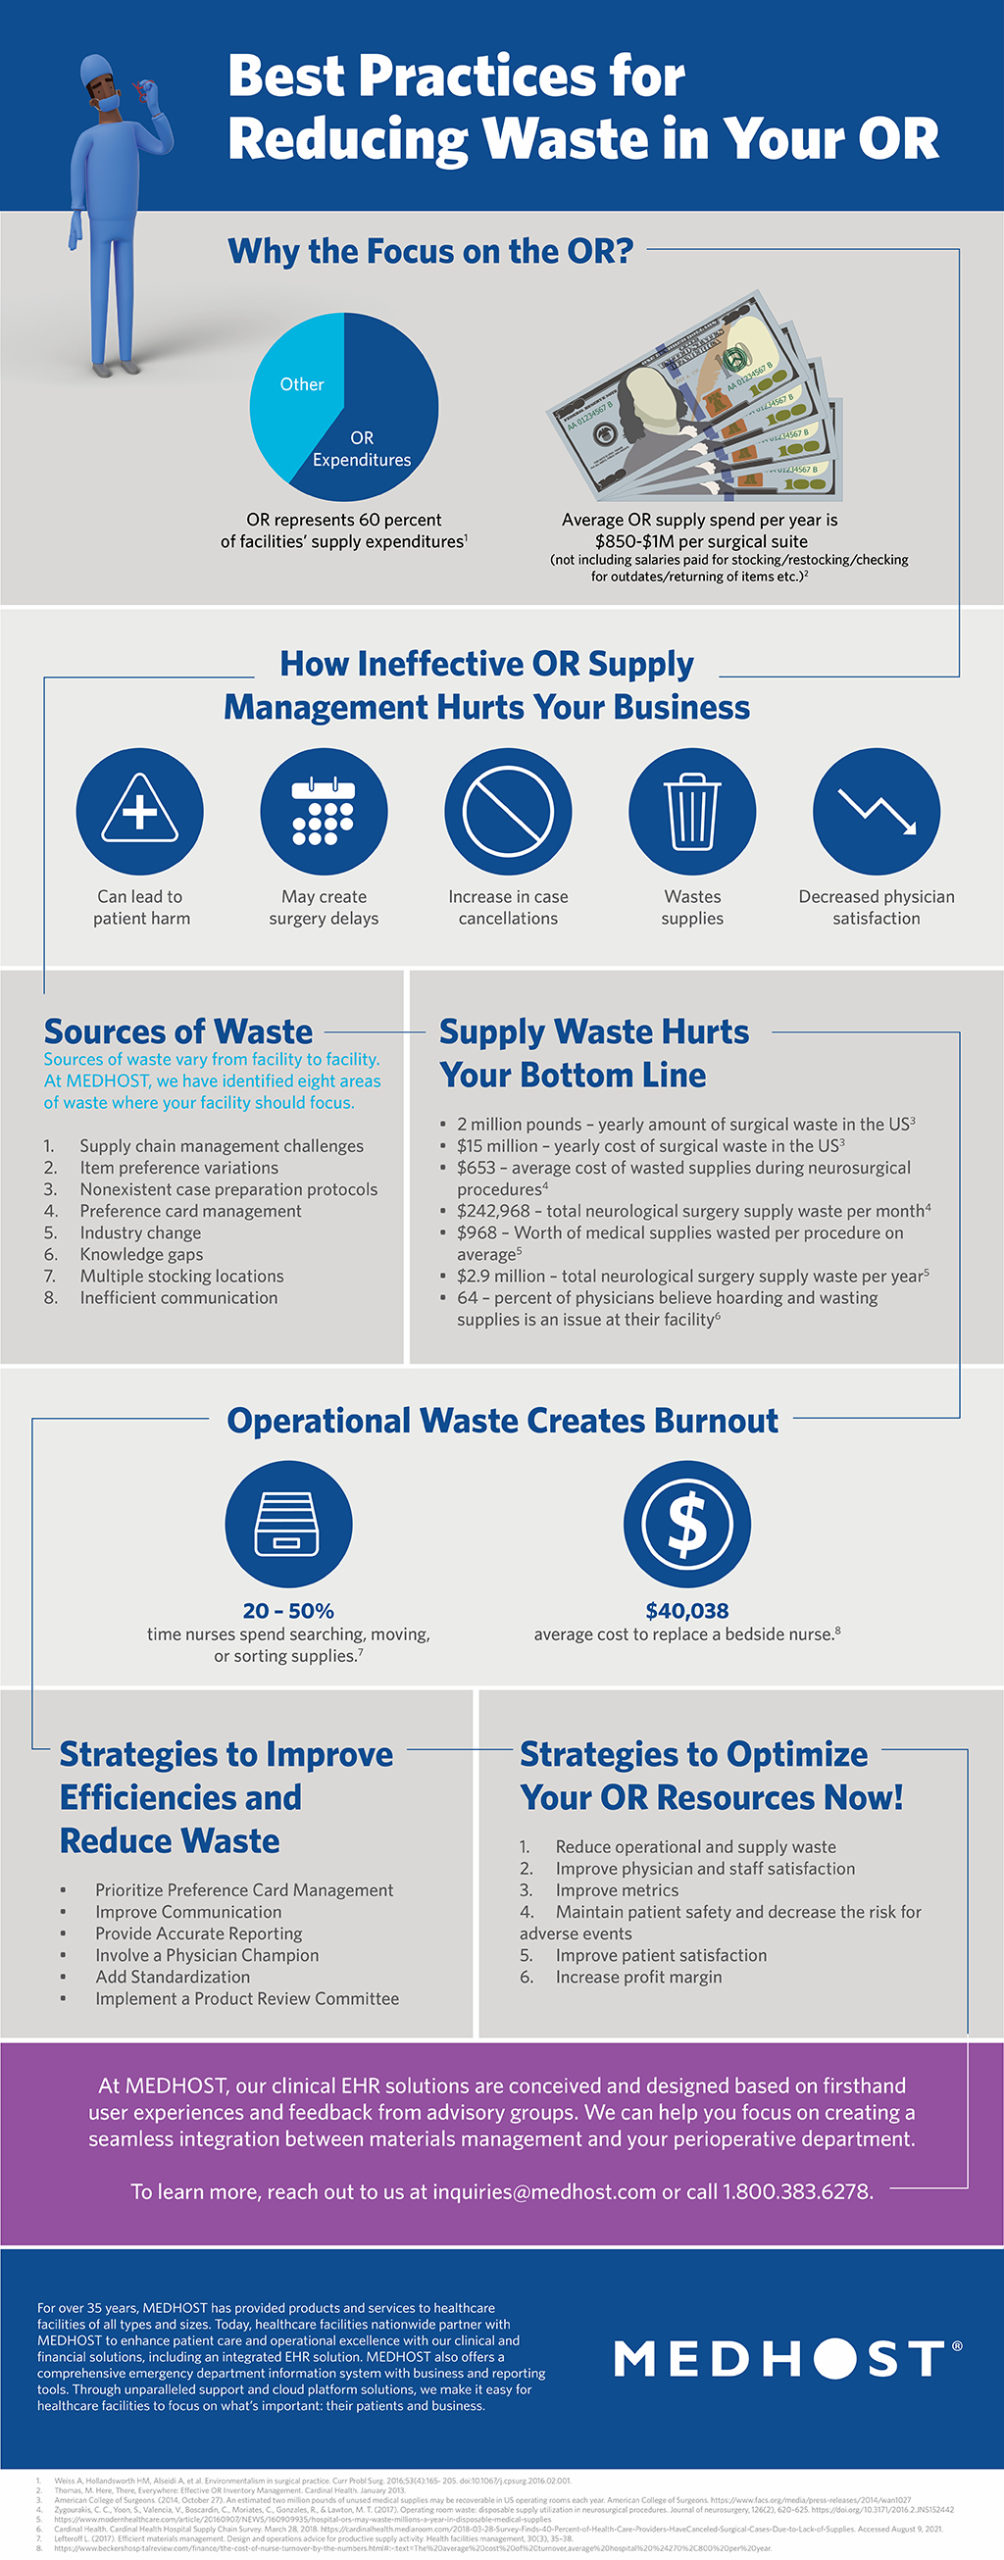 Best-Practices-for-Reducing-Waste-in-Your-OR-Infographic